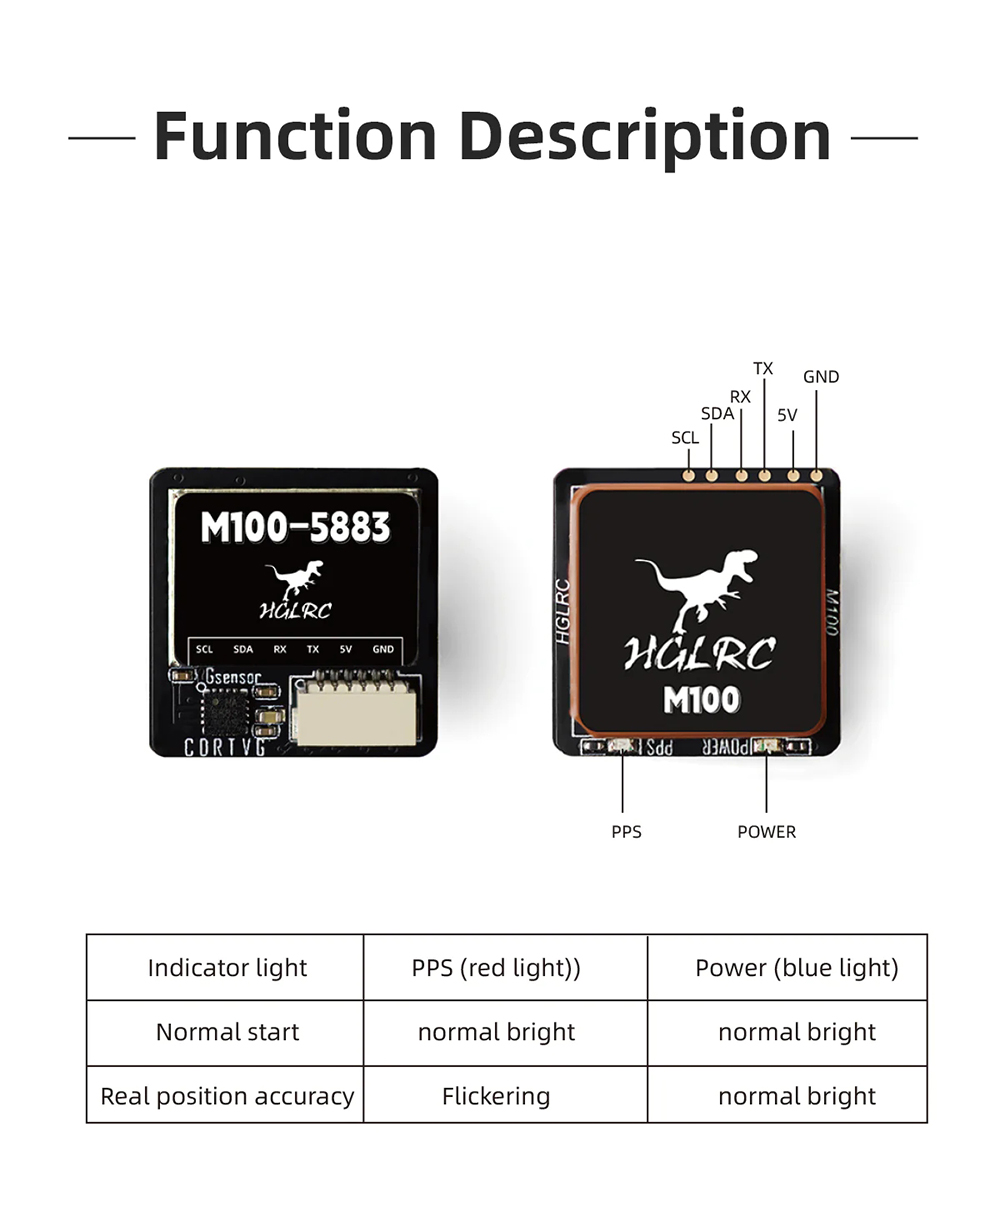 HGLRC M100 5883 GPS Module M10 Chip with QMC 5883 Compass Ceramic Antenna for RC Drone FPV Racing Helicopter Airplane